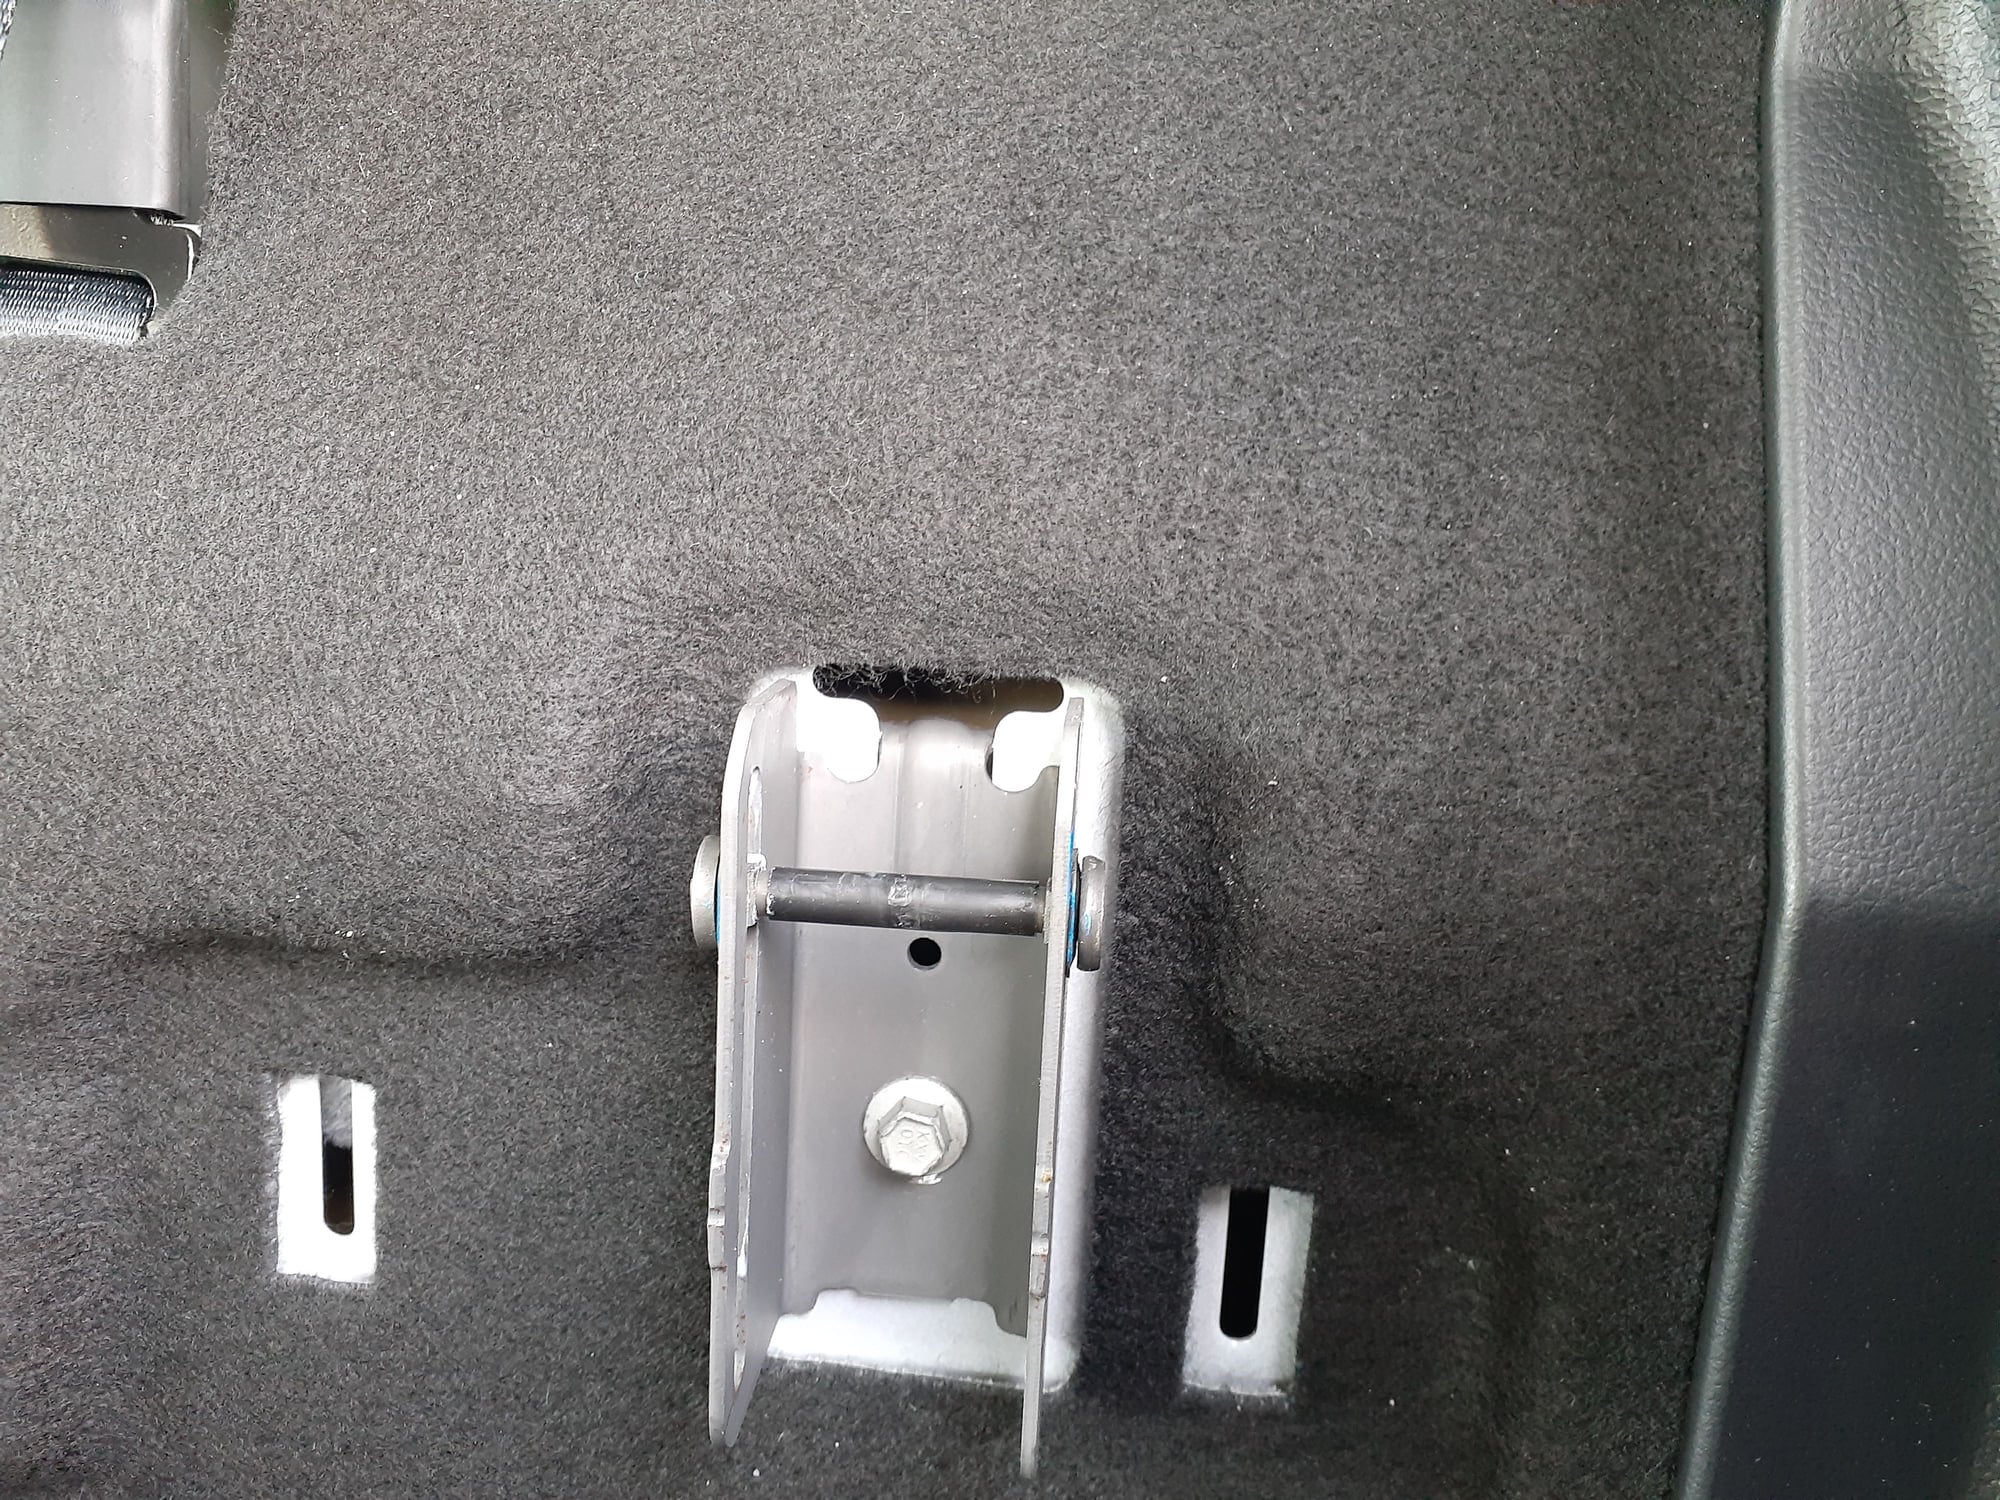 2019 xlt sc trying to fold down rear drivers side seat - Page 5 - Ford 2019 Ford F150 Rear Seat Fold Down